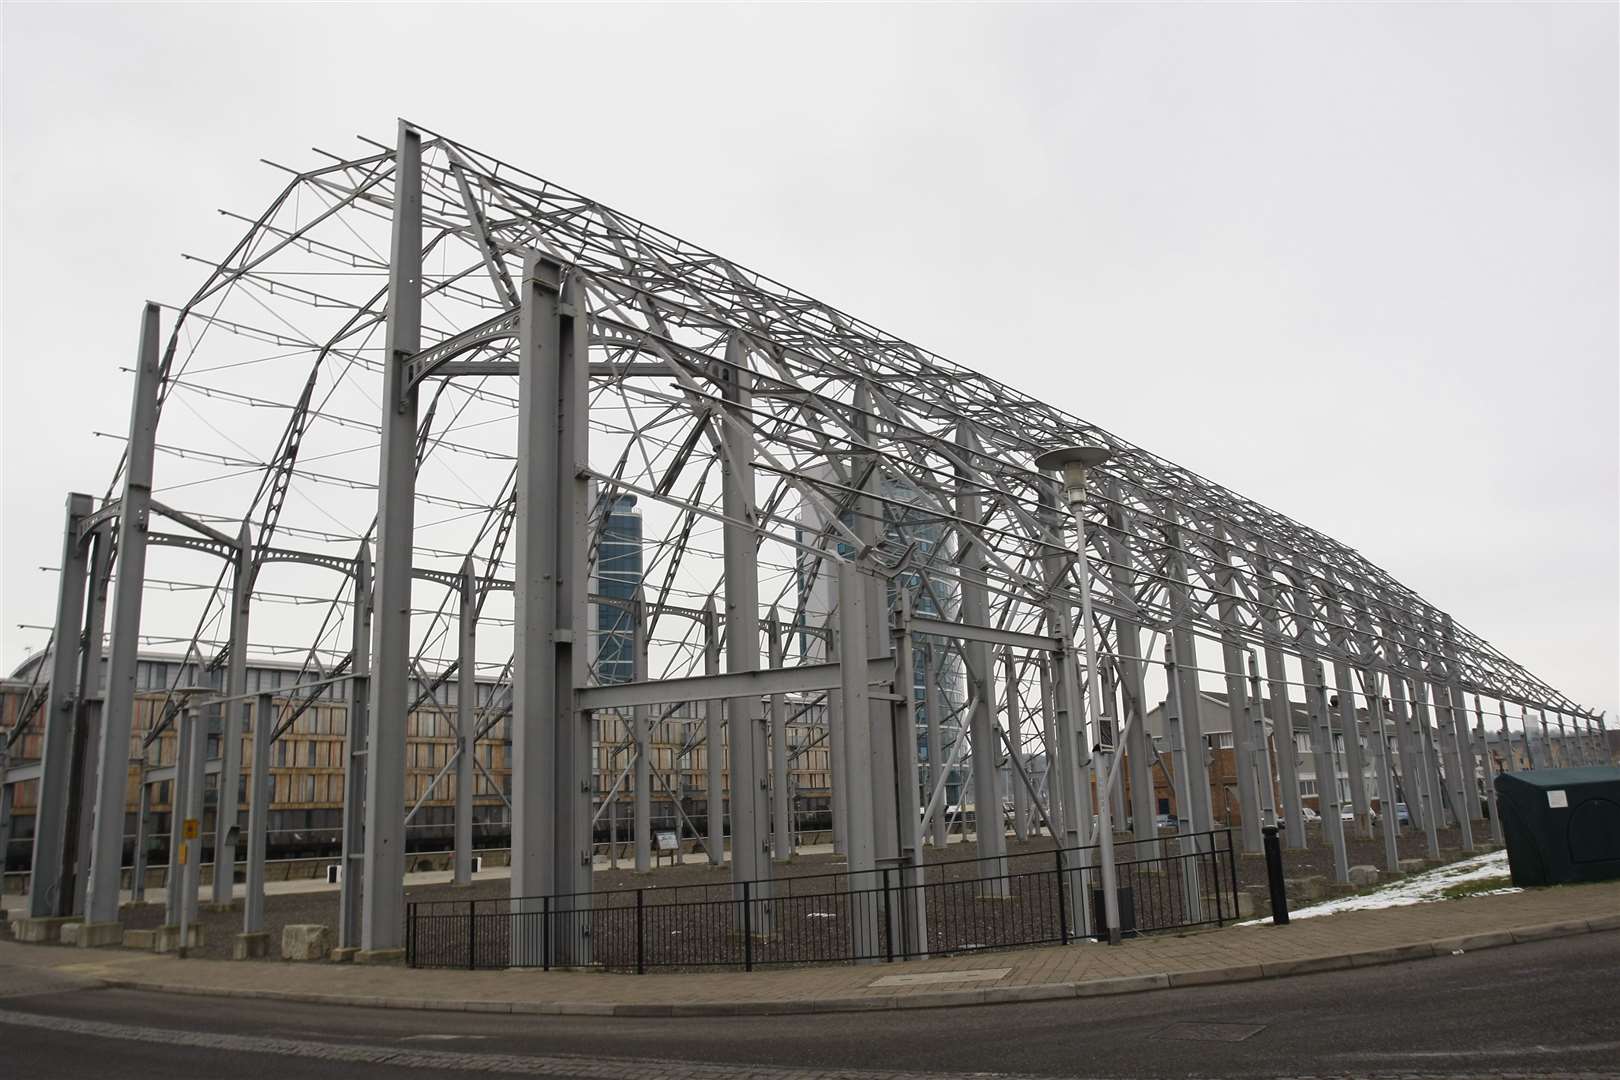 The disused iron framework could house the cinema. Picture: Peter Still